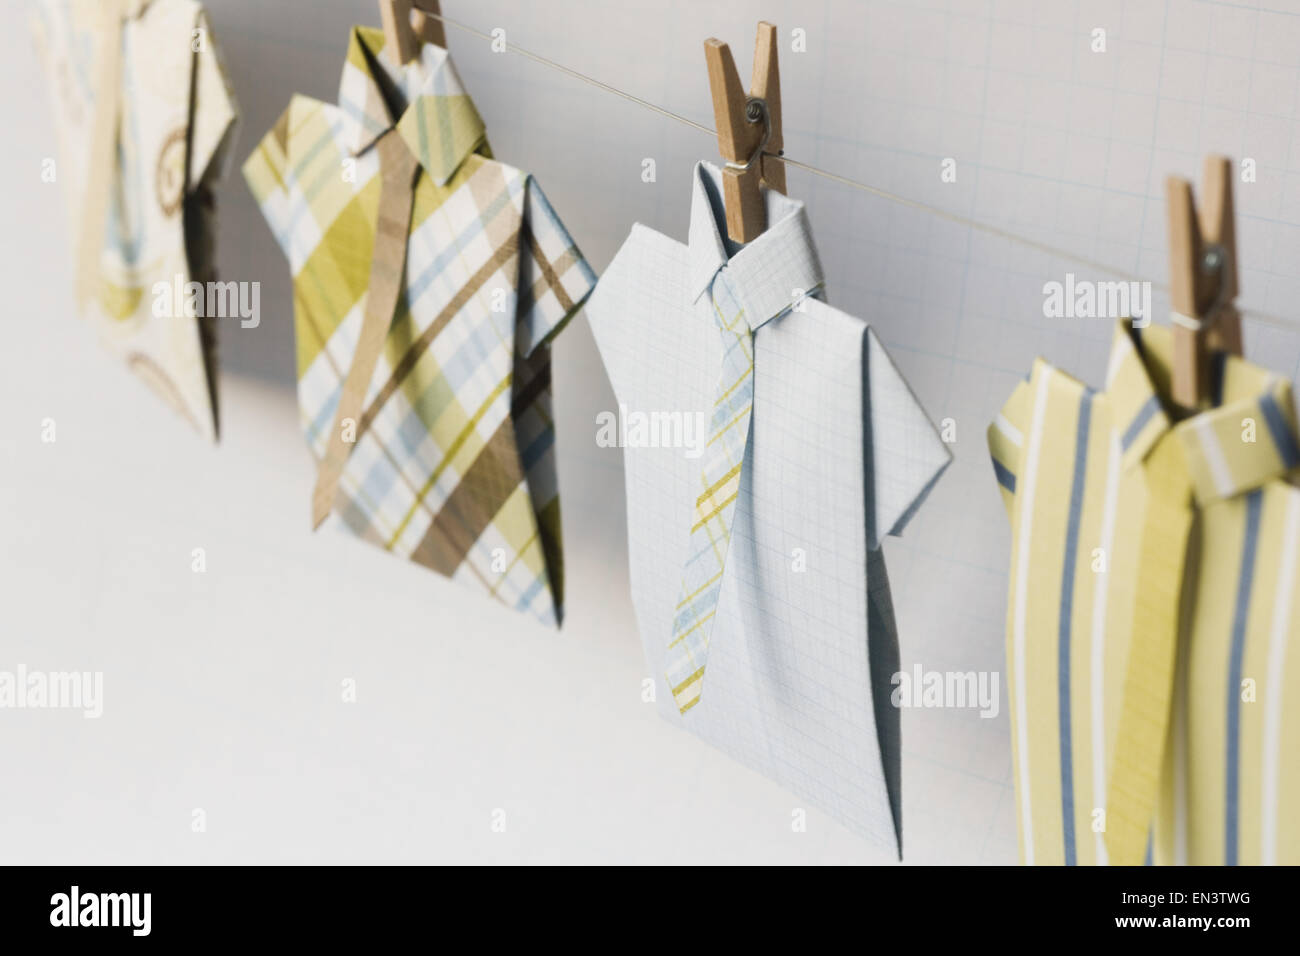 Dress shirts on clothesline with clothes pegs Stock Photo